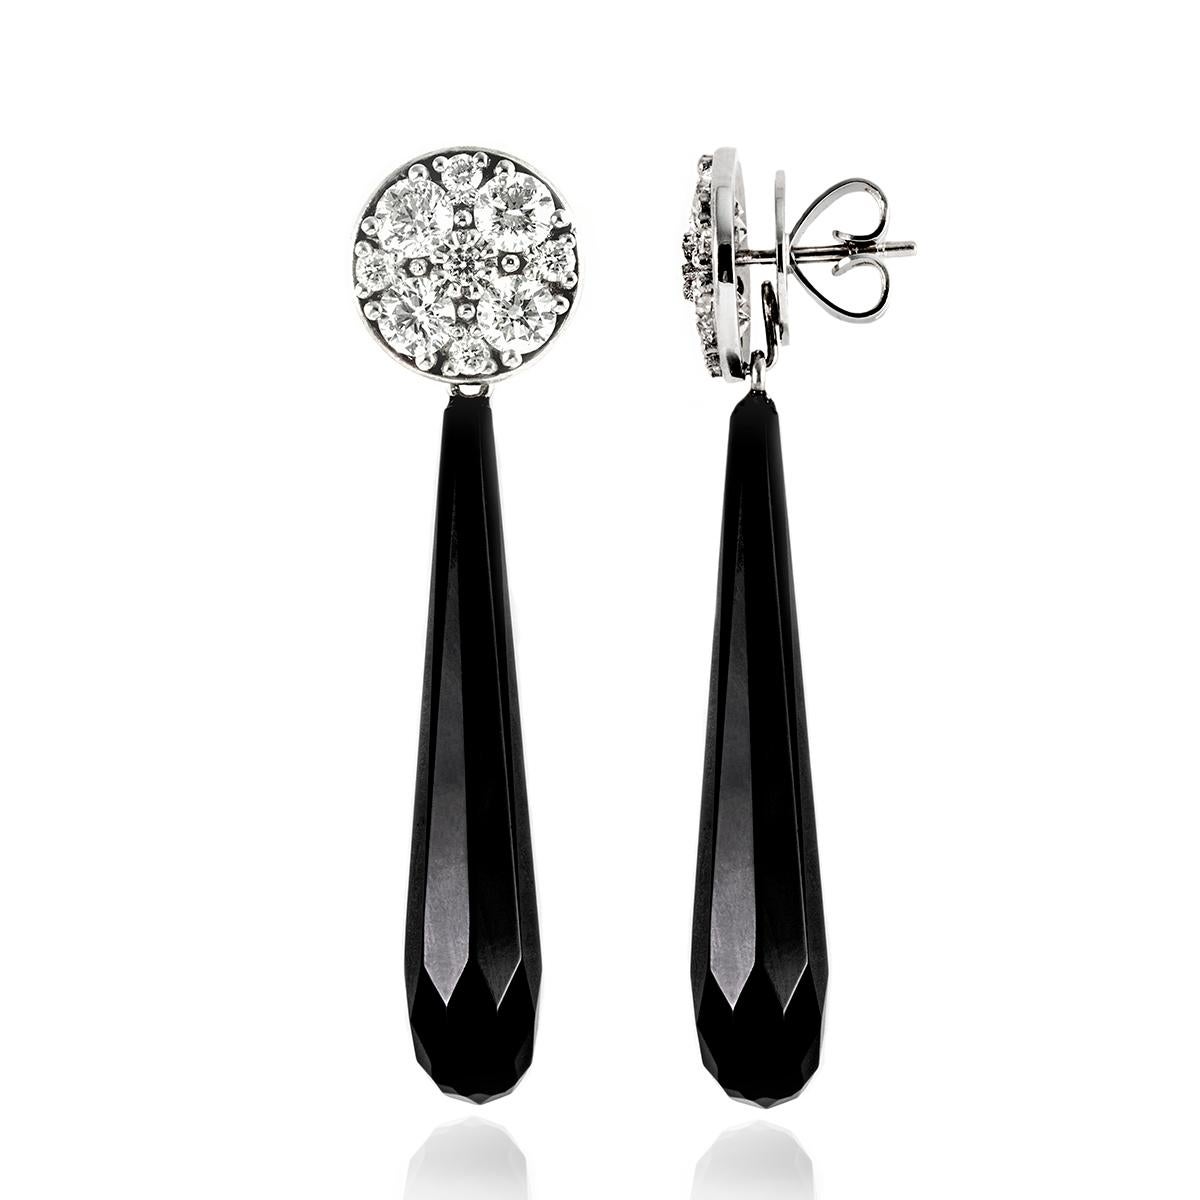 18ct White Gold Handmade Diamond Grain Set cluster earrings with 40mm long onyx briolette drops - post and butterfly
can be worn together or the diamonds can be worn on their own as separate stud earrings. 
The diamond tops - hand made grain set